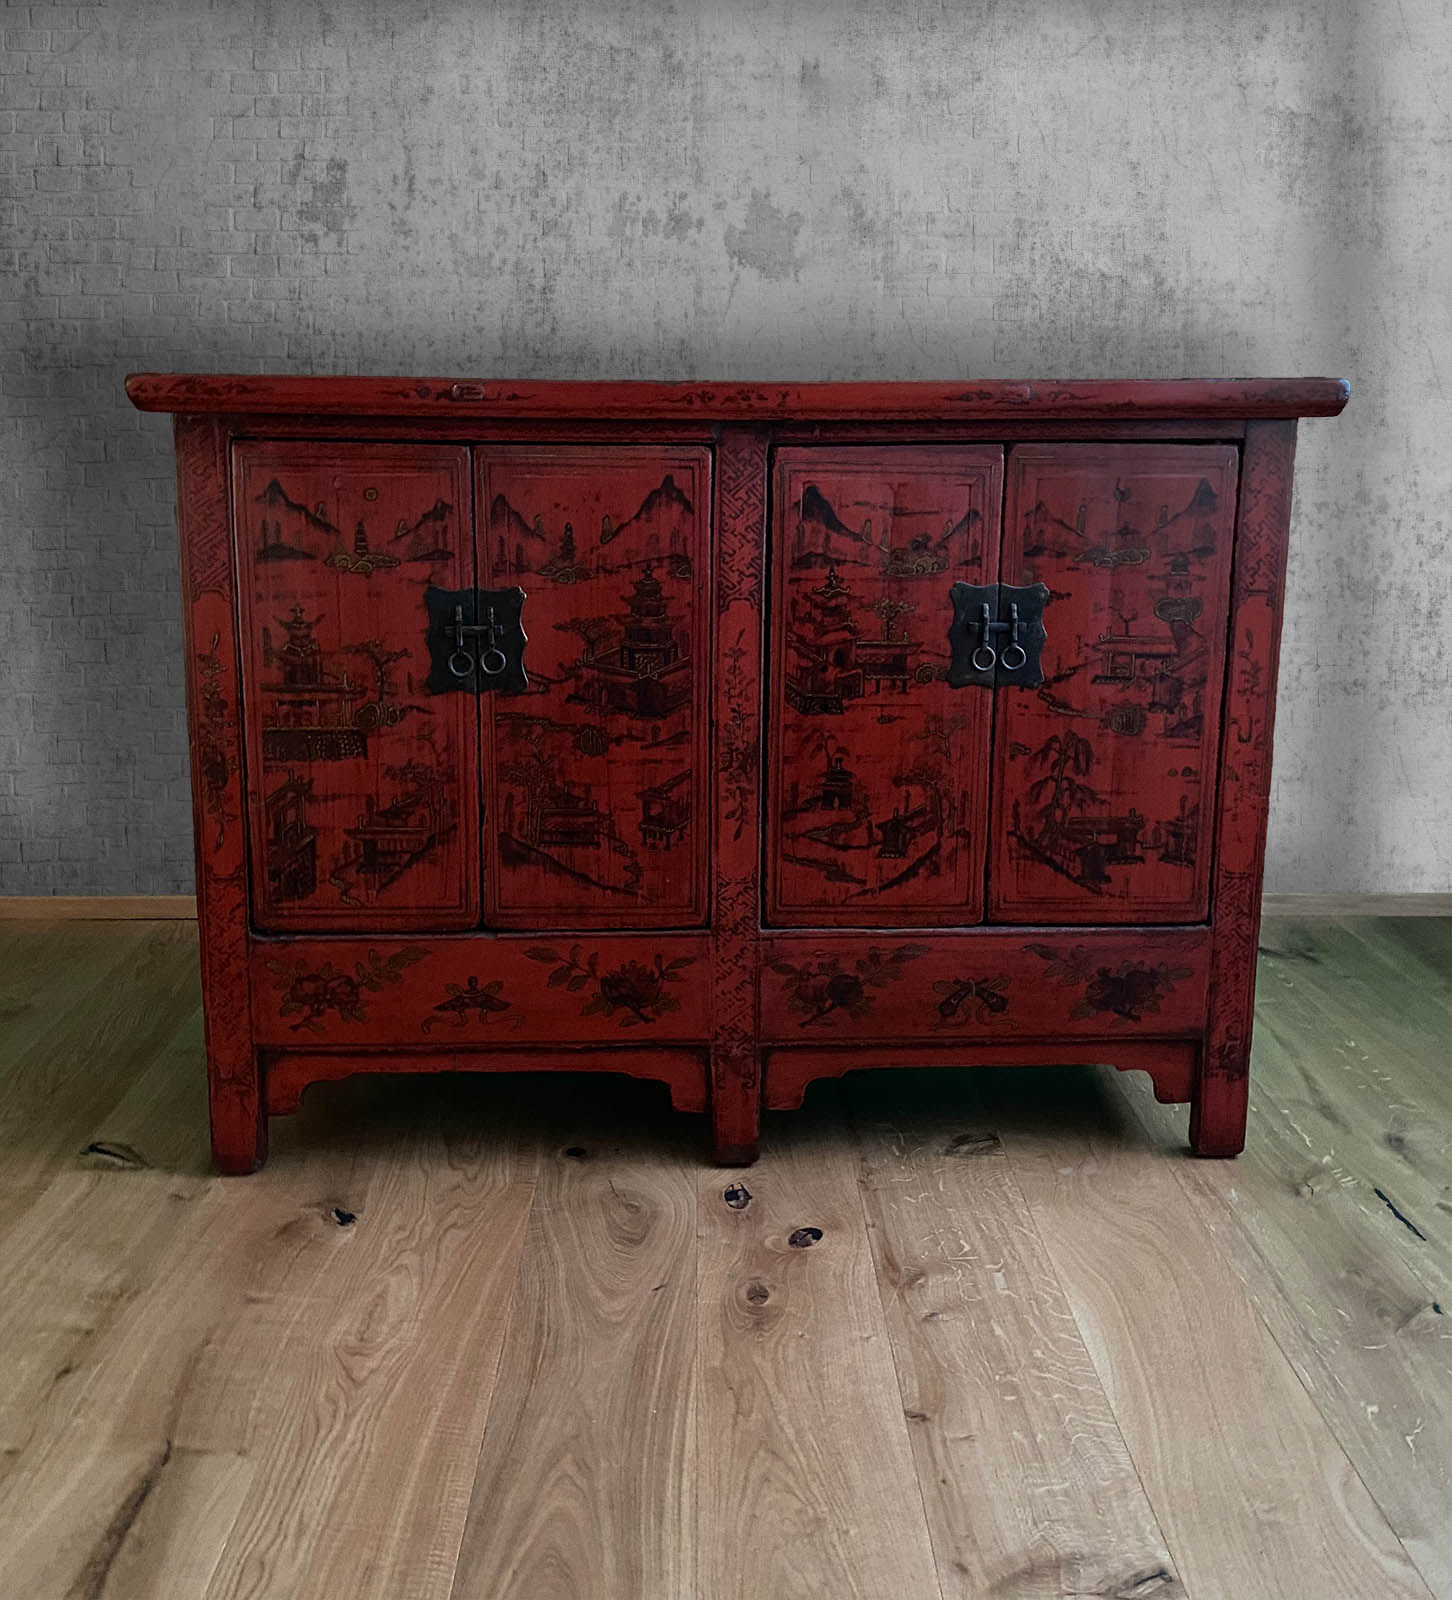 Asia Kommode China Möbel rot chinesisches Sideboard